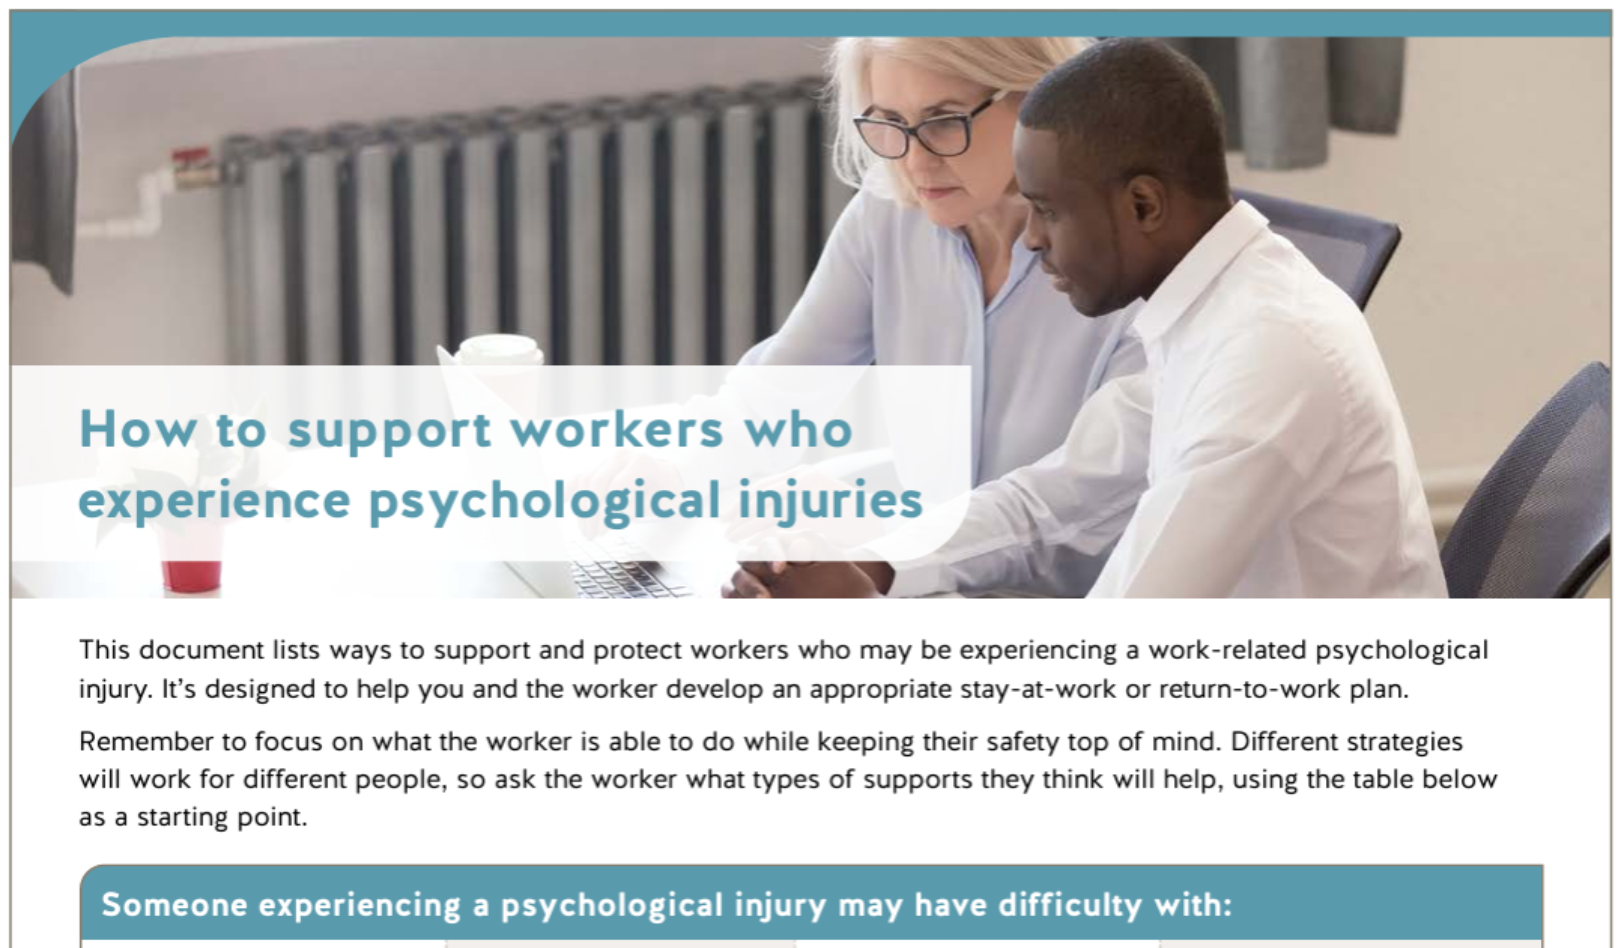 How to Support Workers Who Experience Psychological Injuries